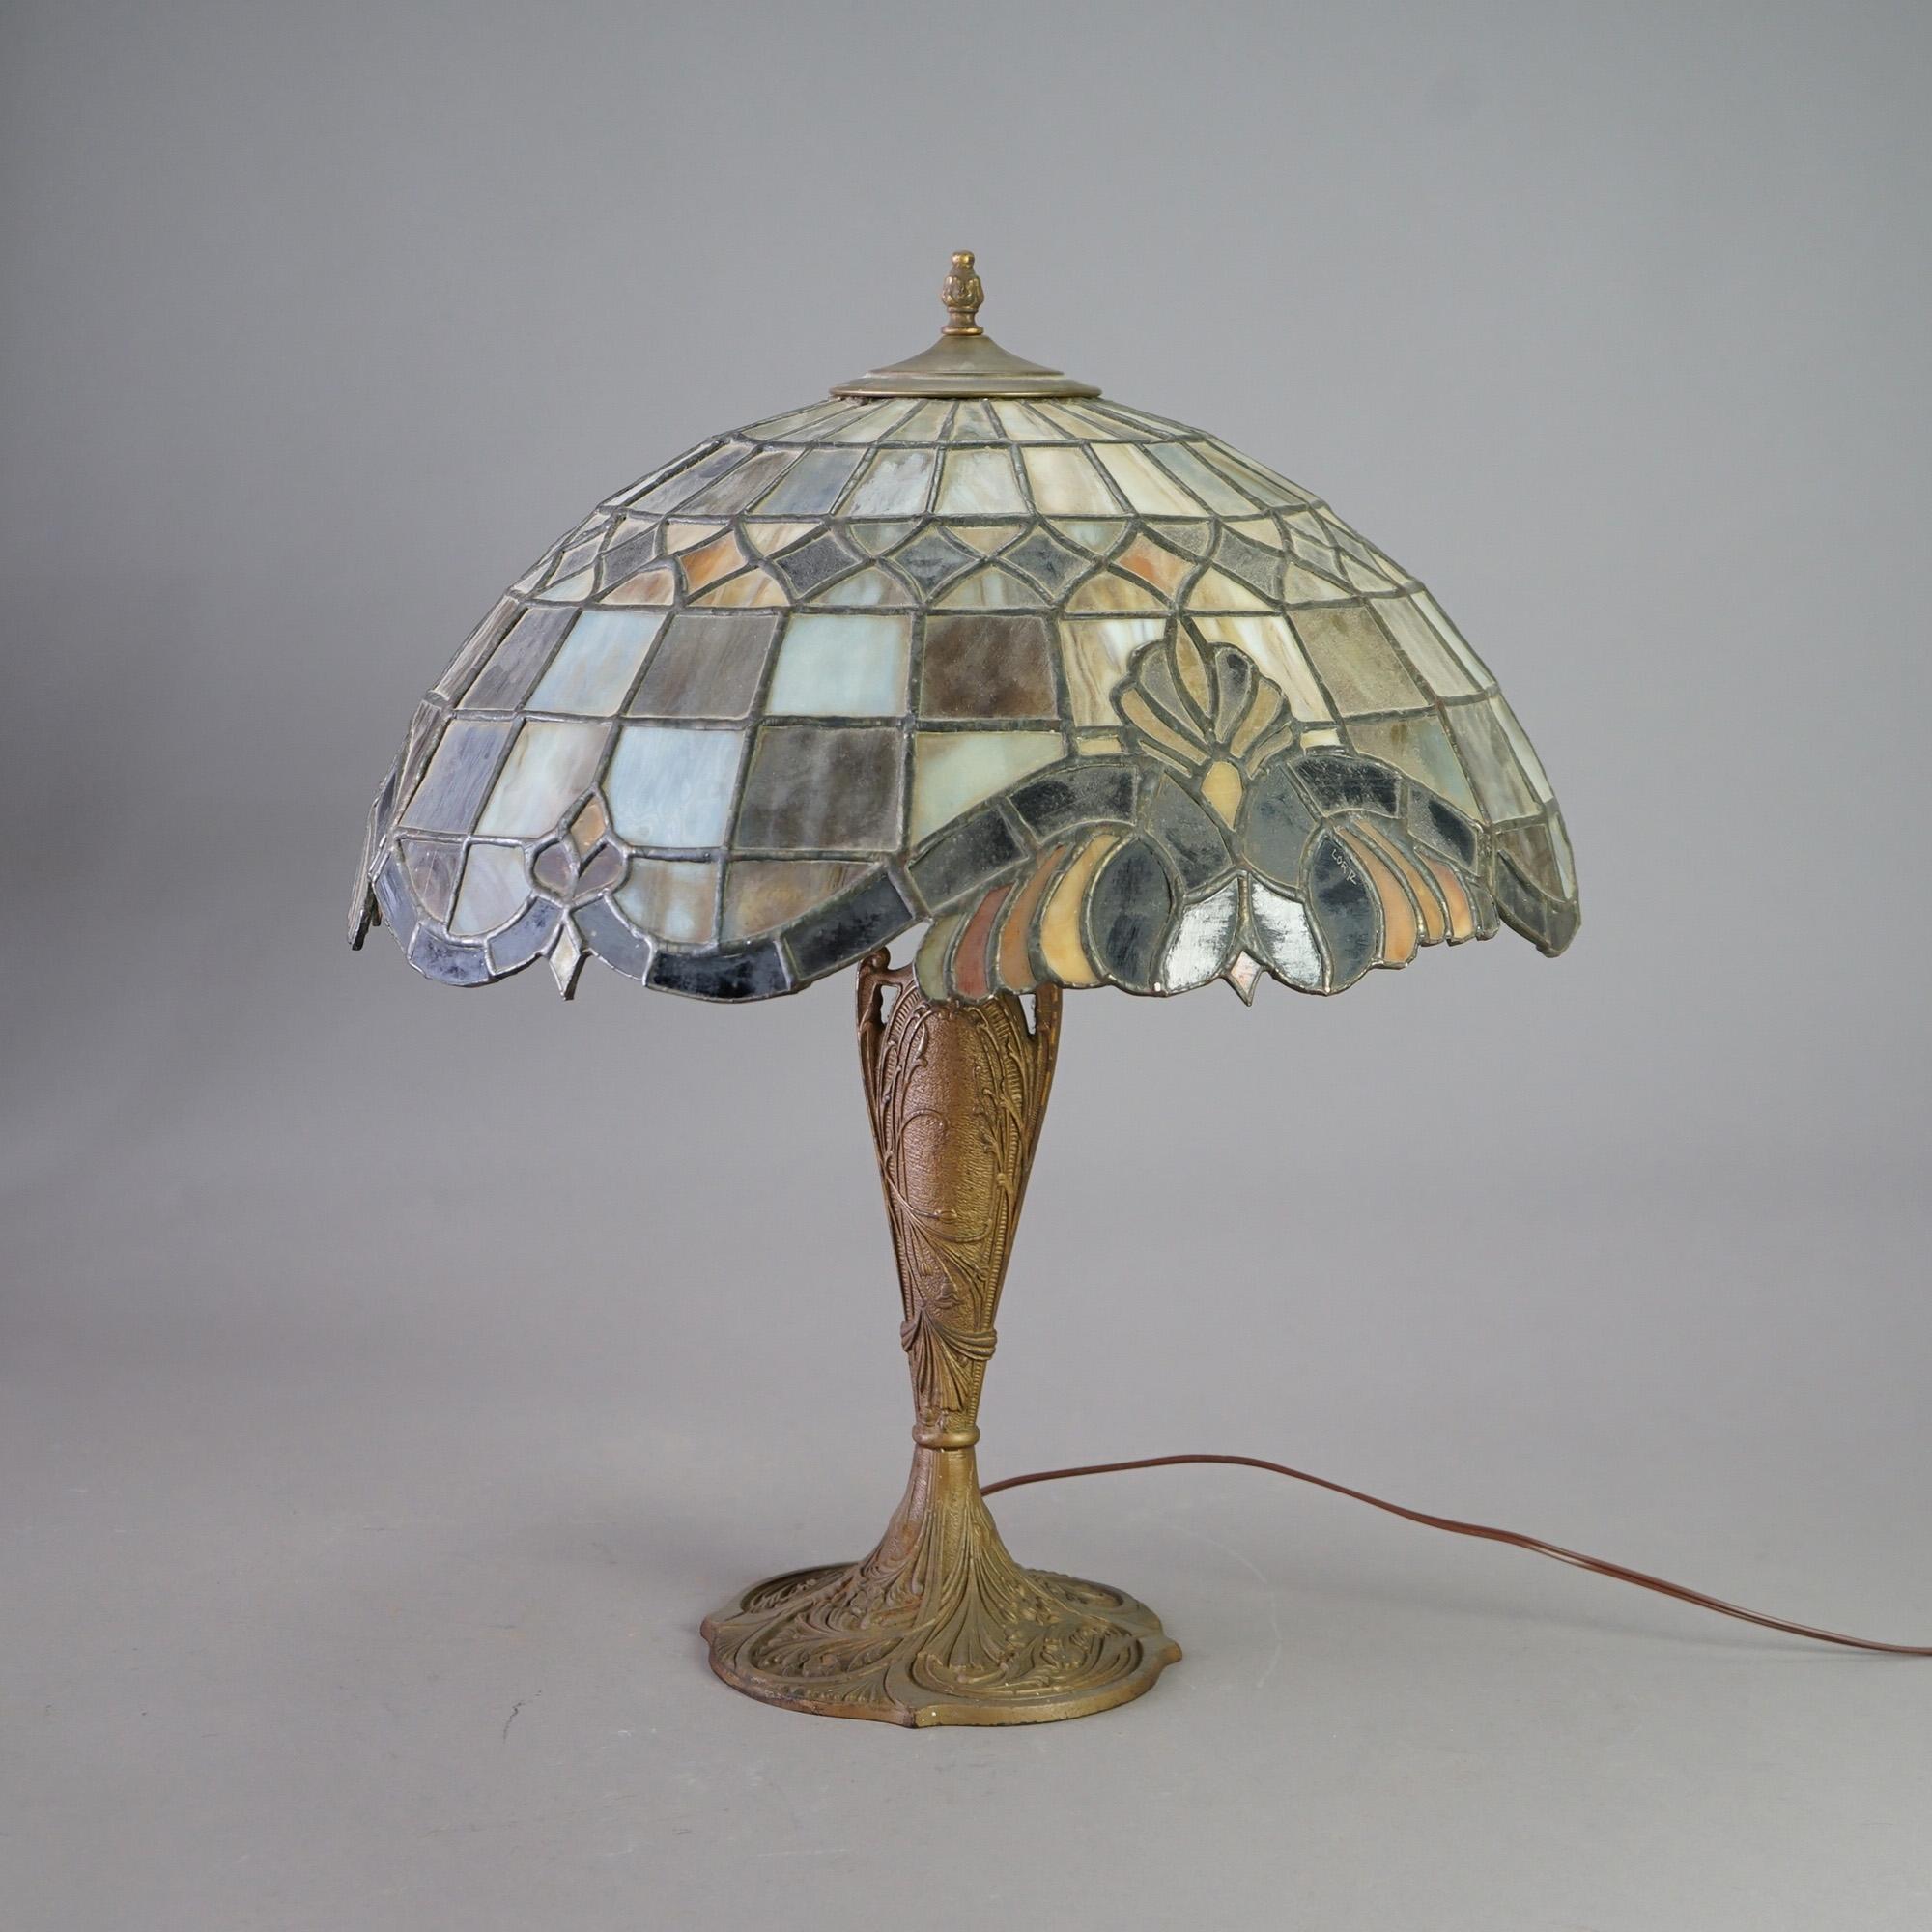 An antique Arts and Crafts table lamp offers leaded stained and slag glass dome-form shade with stylized foliate design over double socket cast base, c1920

Measures - 23